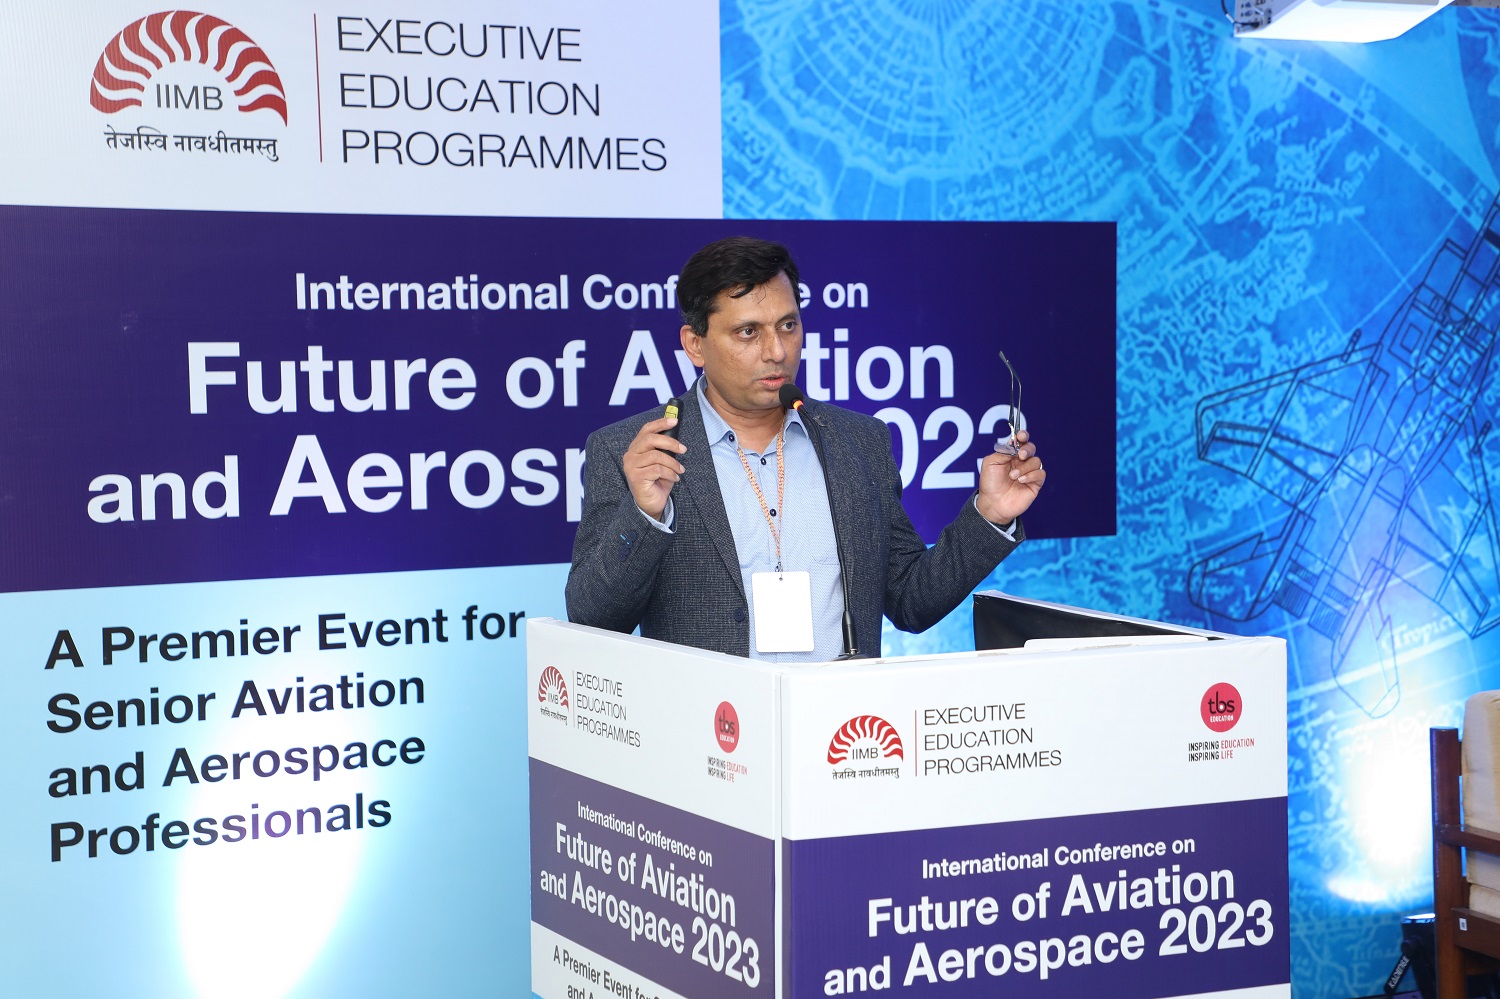 Vasudevan S, Ex-partner and Global Sector Lead (Airports), KPMG, spoke on 'Future of Airport Privatization' at FOAA 2023.